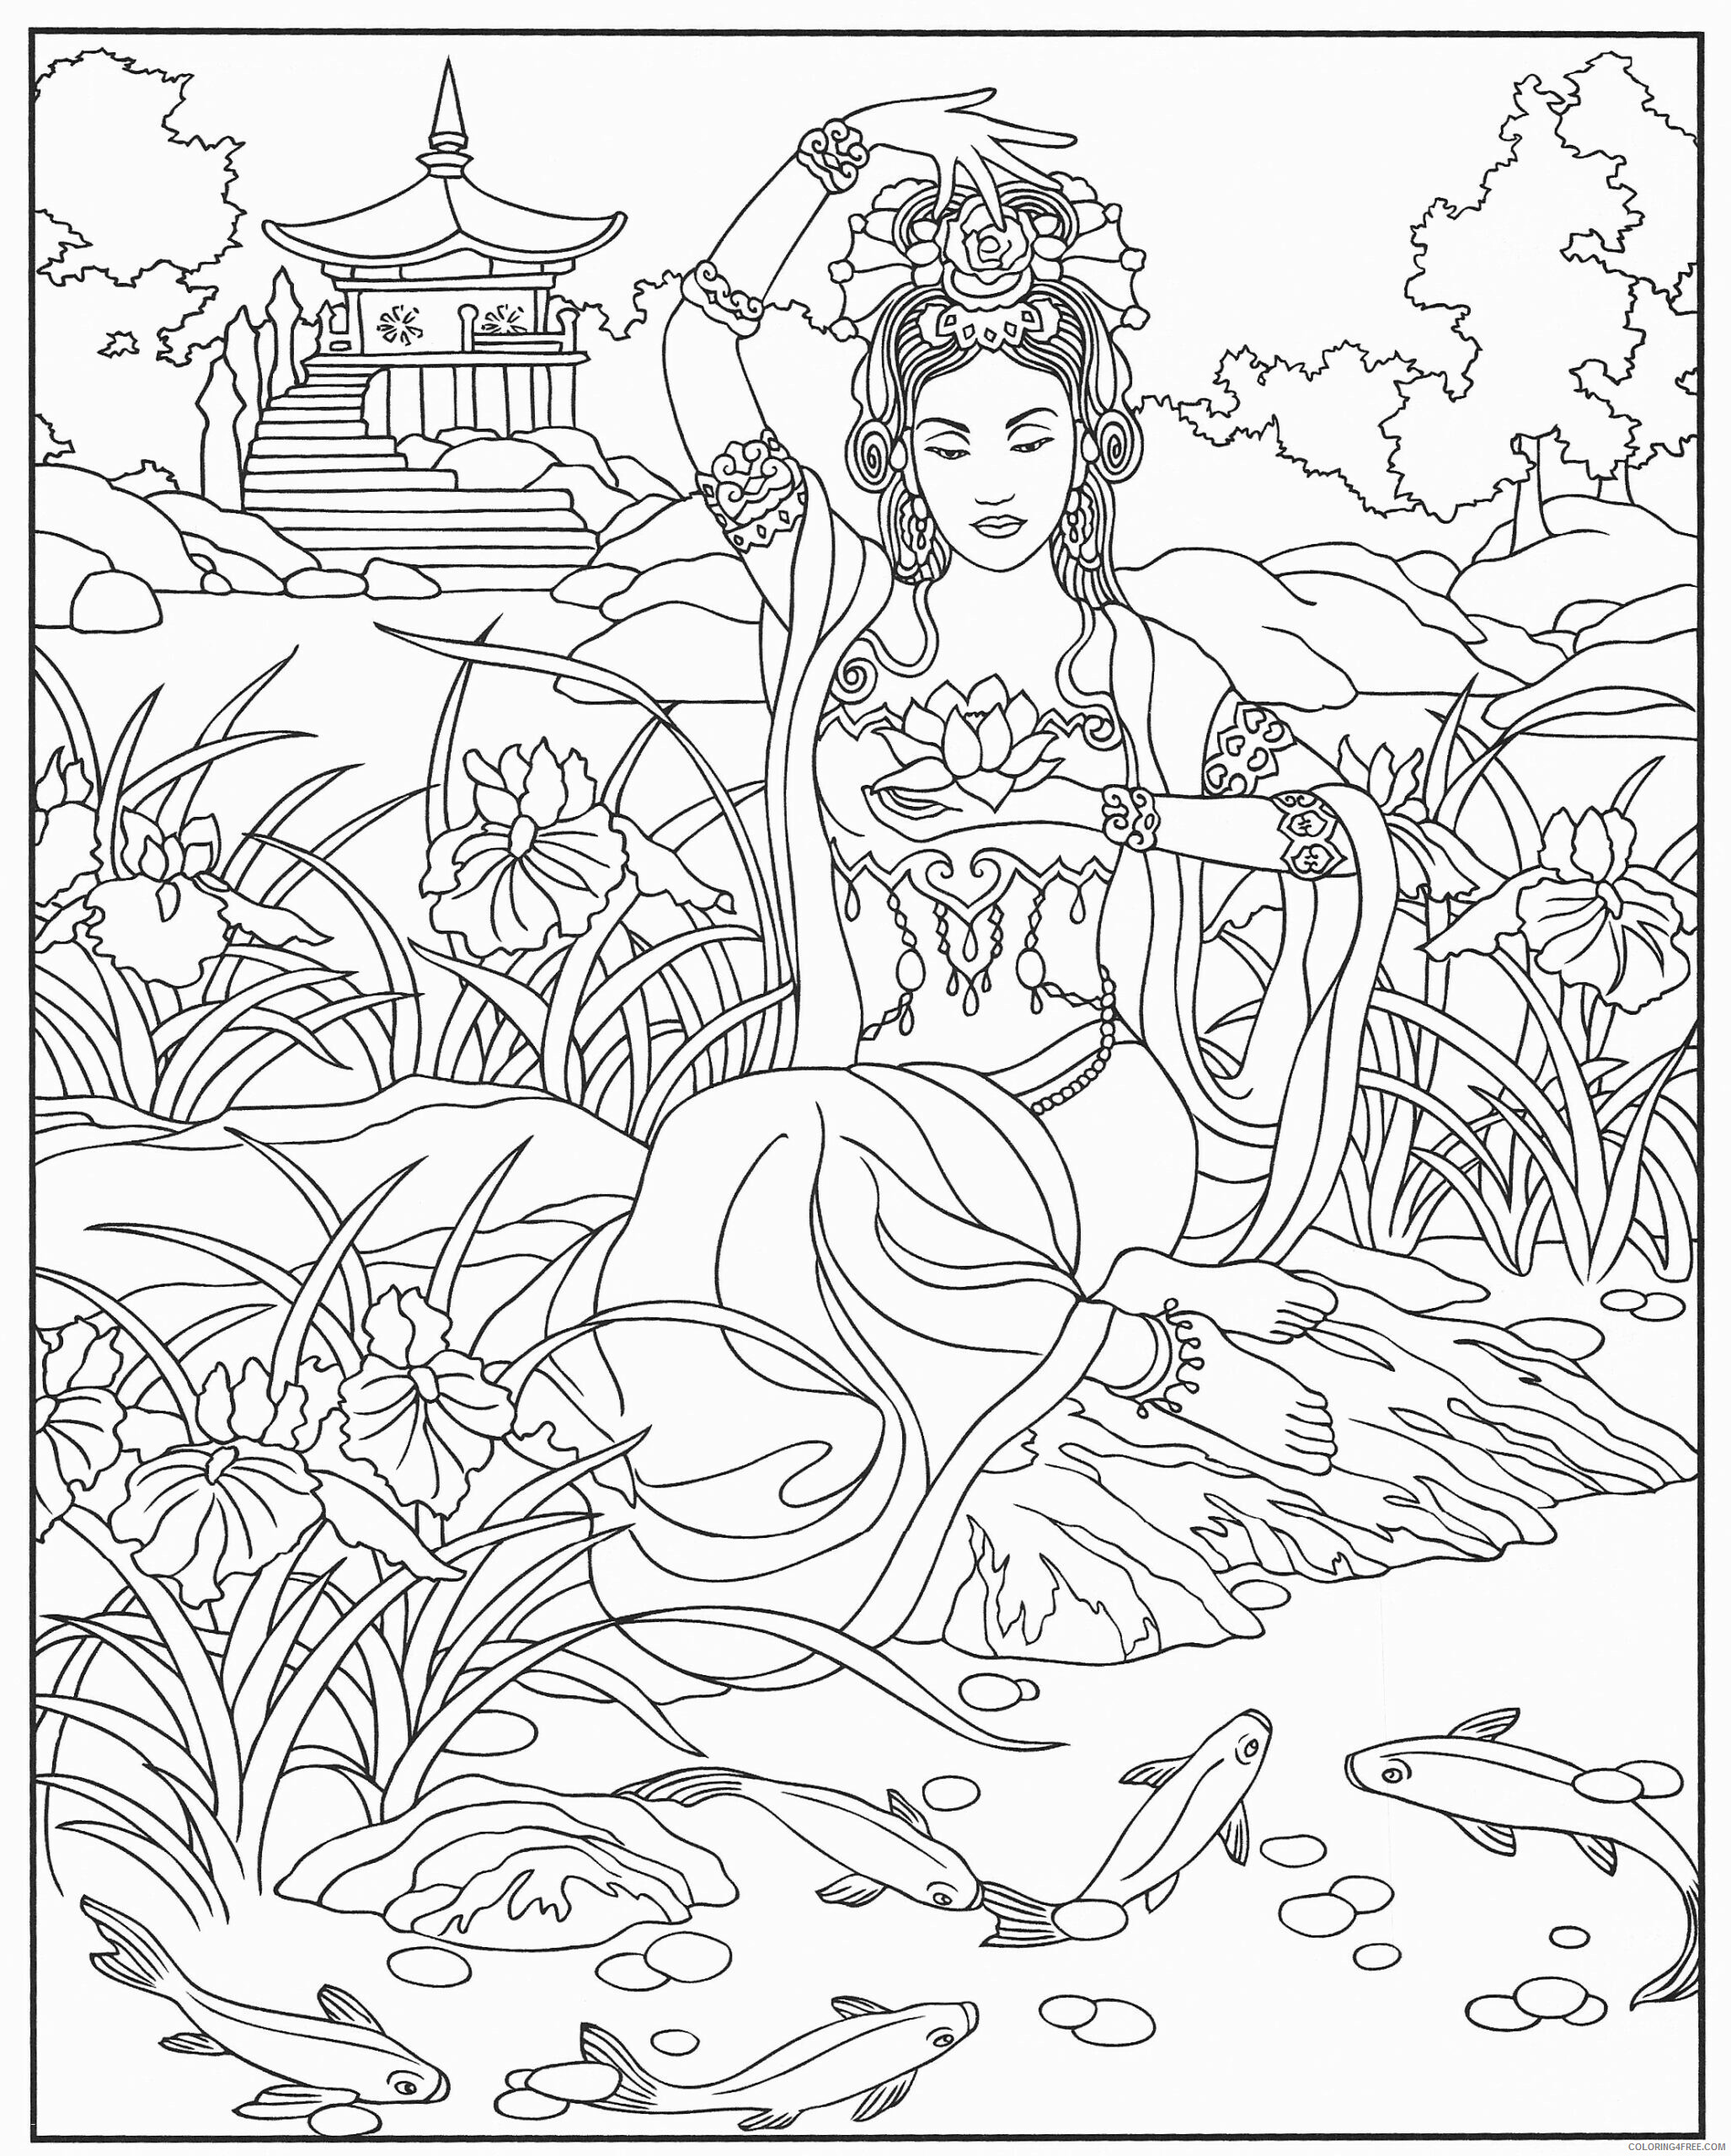 Jungle Coloring Pages Nature Complex for Teens Printable 2021 257 Coloring4free